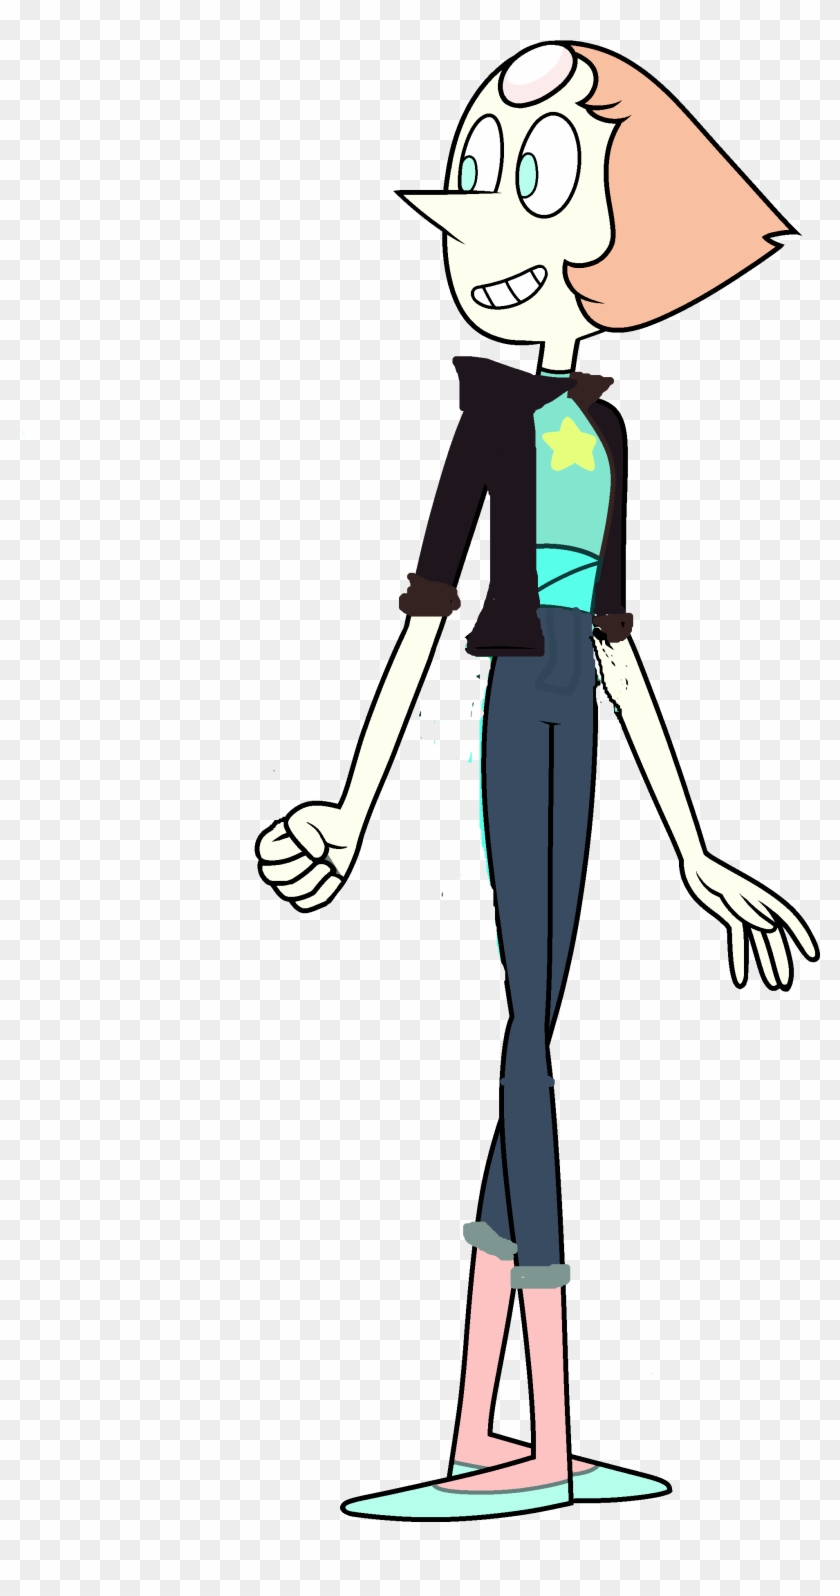 Pearl With Jacket And Jeans - Pearl Jacket Steven Universe Clipart #898183